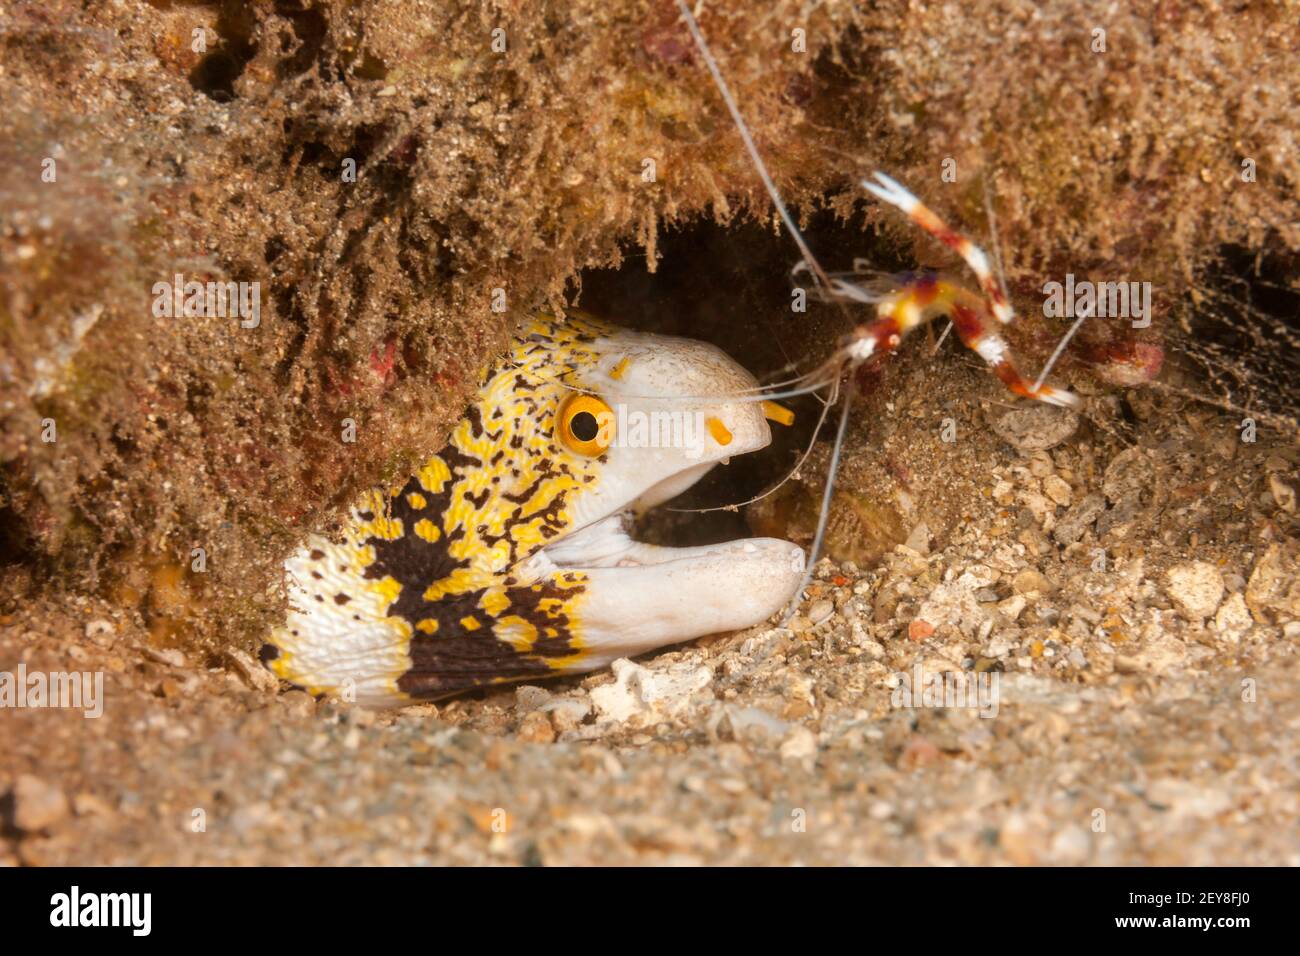 This snowflake moray eel, Echidna nebulosa, shares a spot on the reef with a banded boxer shrimp, Stenopus hispidus, Hawaii. Stock Photo